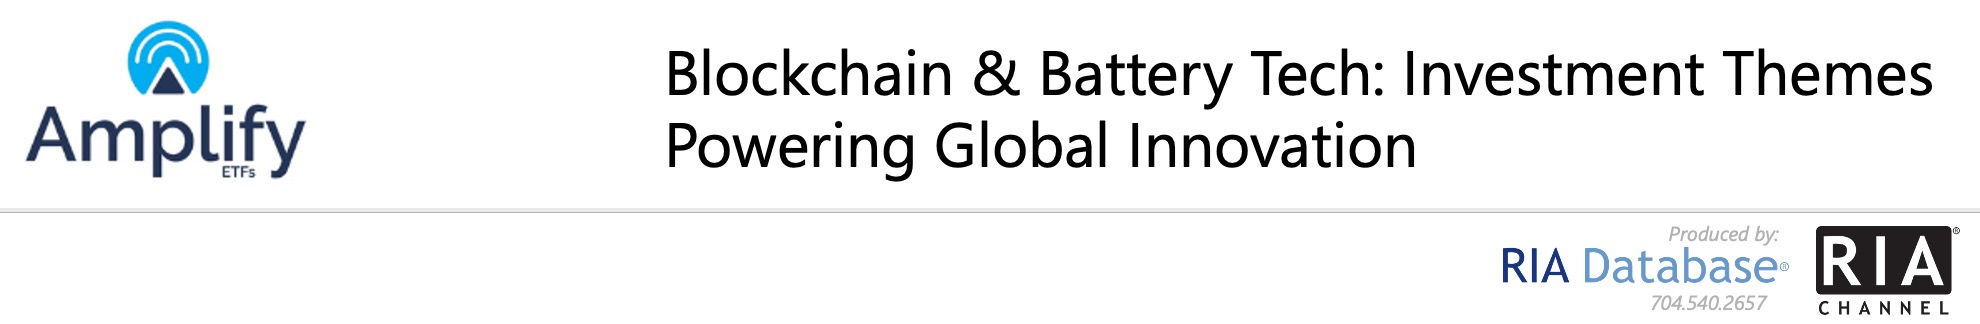 Blockchain & Battery Tech: Investment Themes Powering Global Innovation